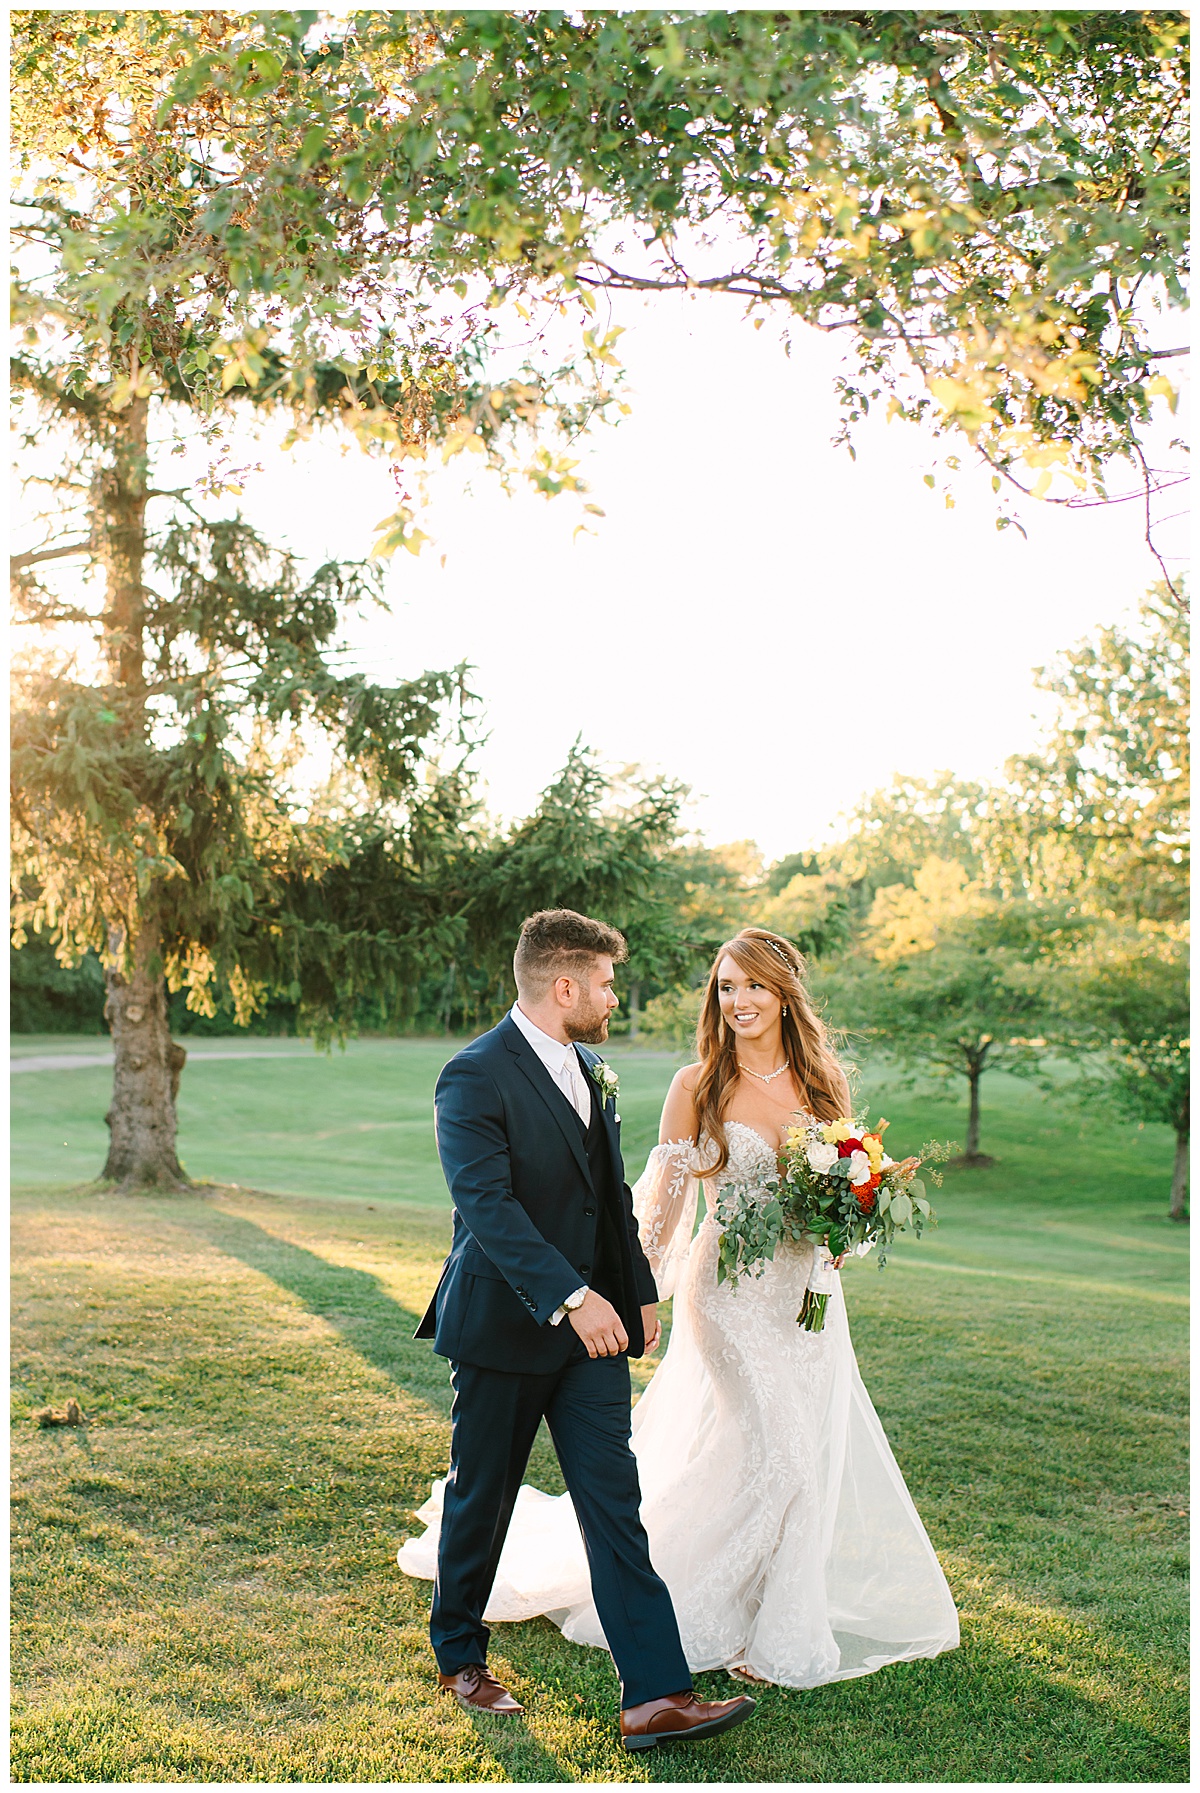 Man and woman walk together for Brittany Emerson Photography